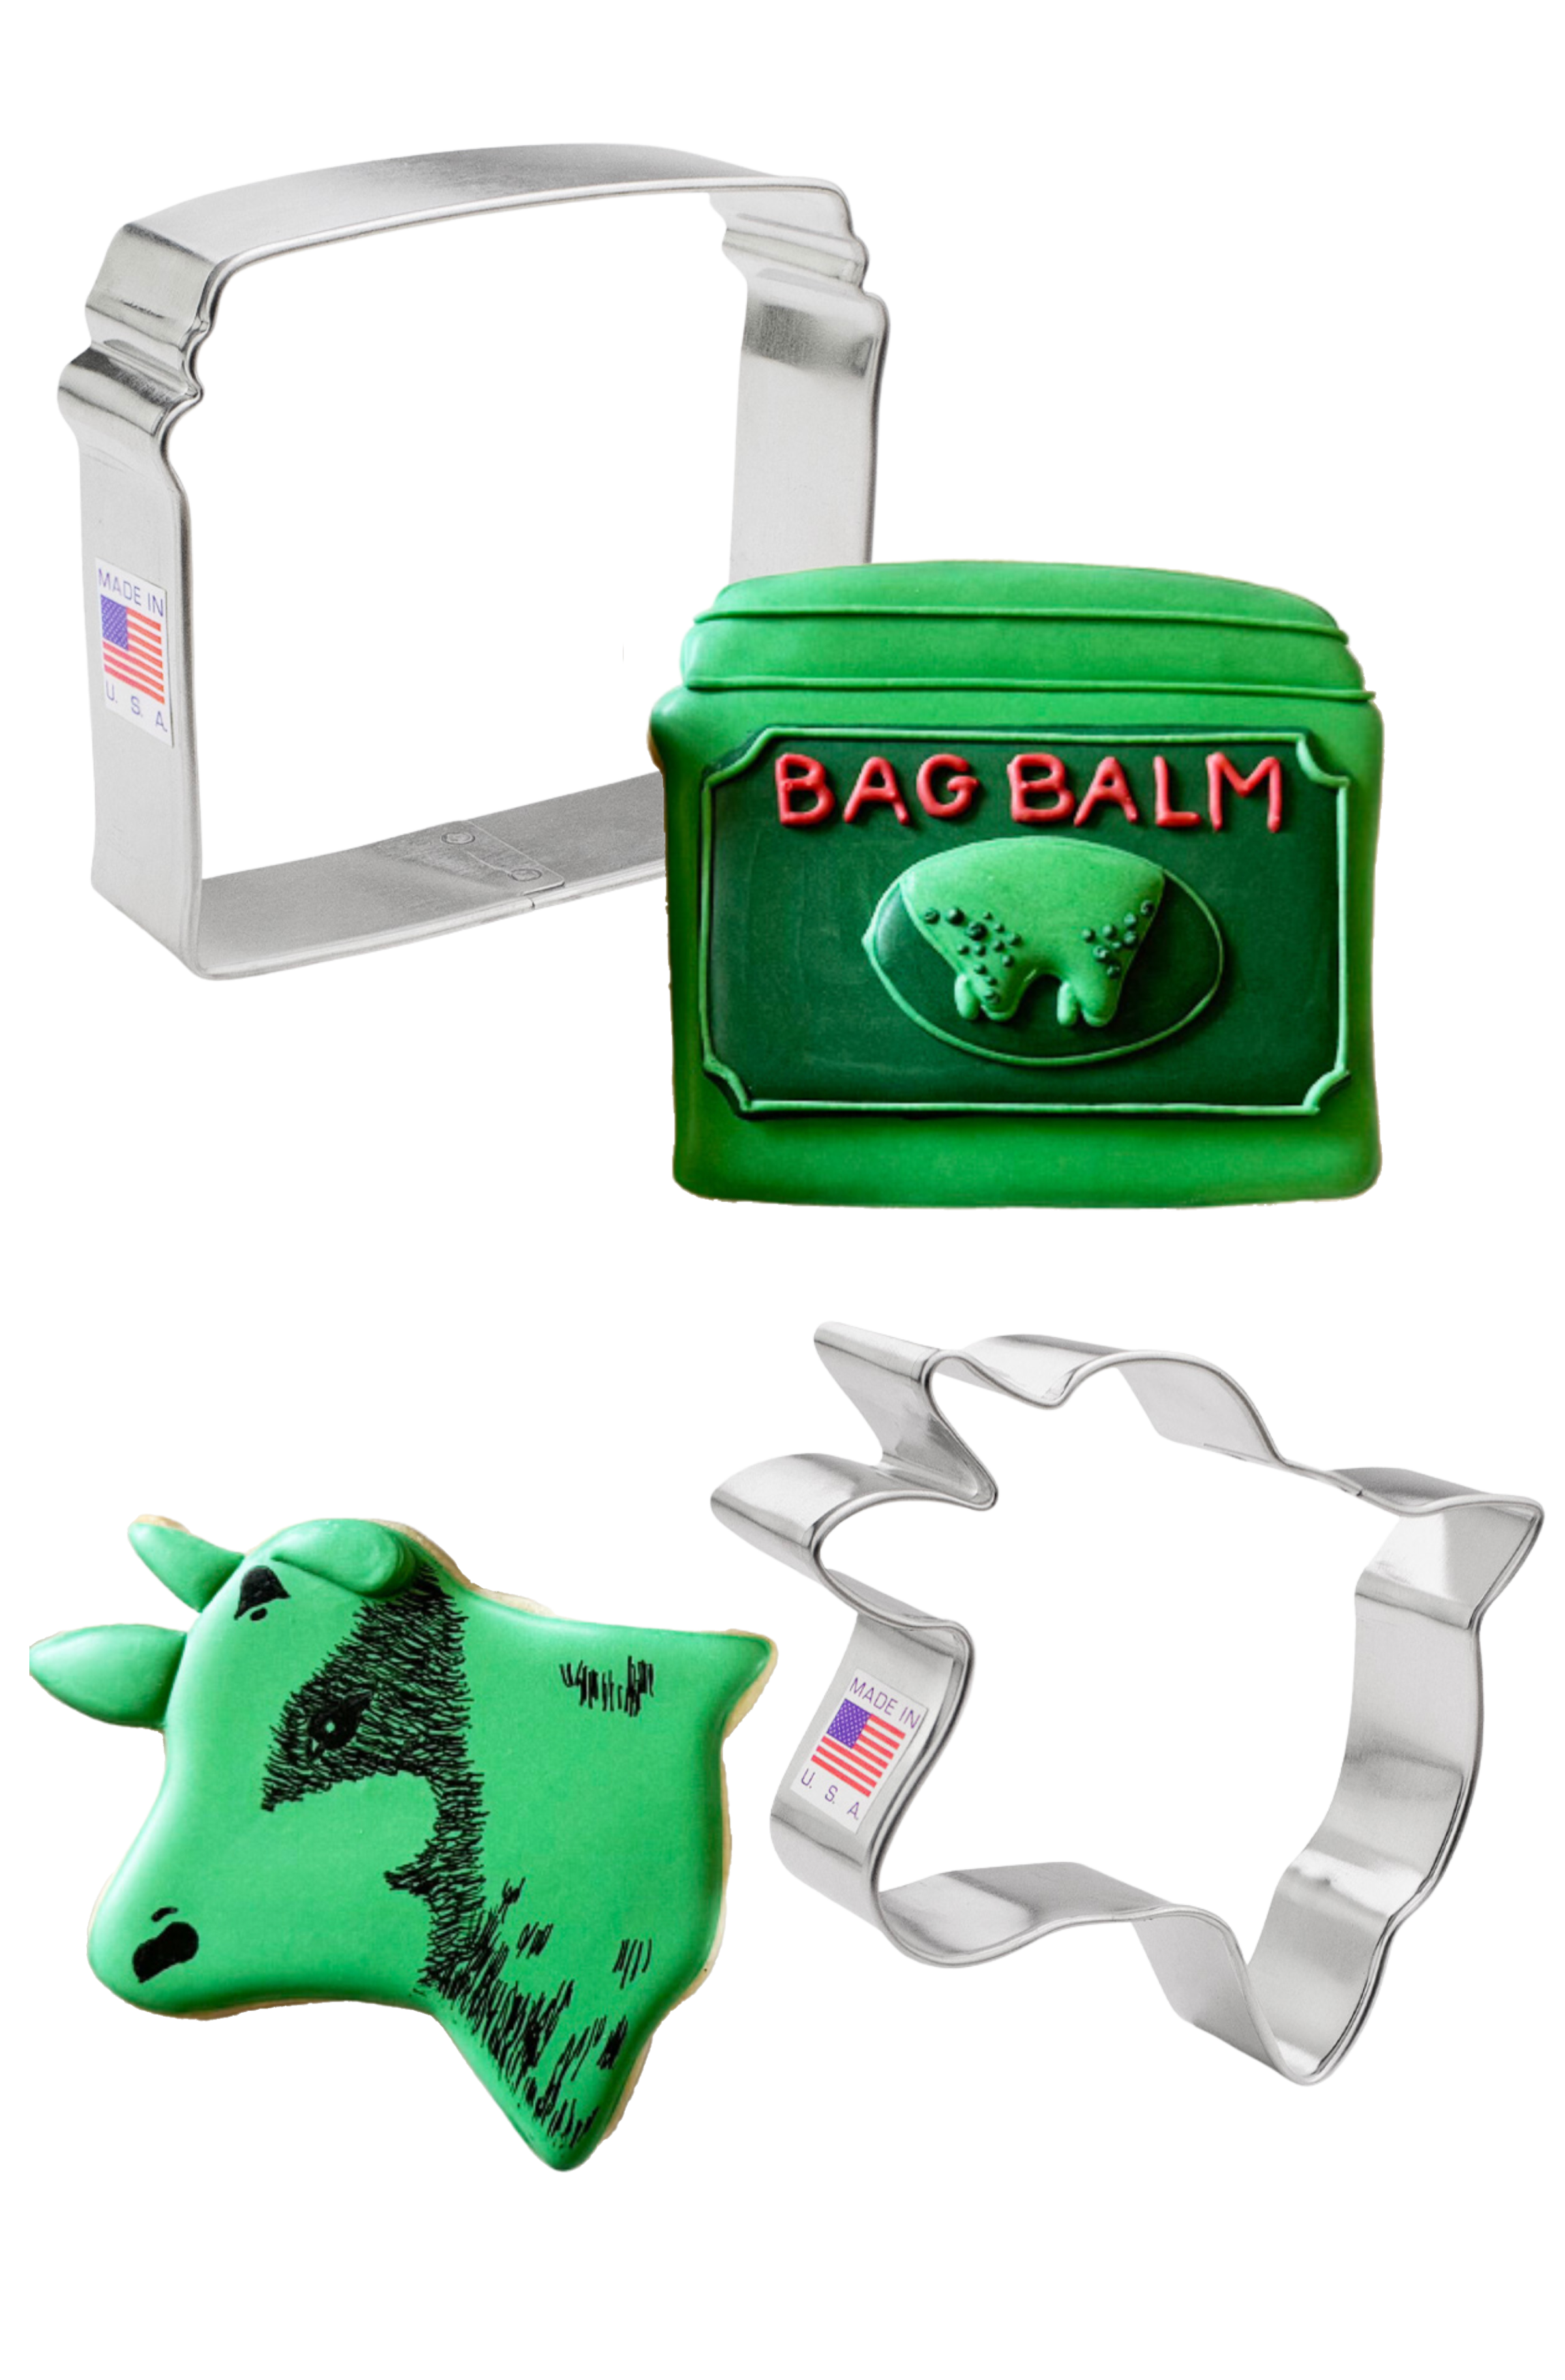 Cookie cutters shaped like Bag Balm tins and cow from bag balm logo, a fun addition to any kitchen.